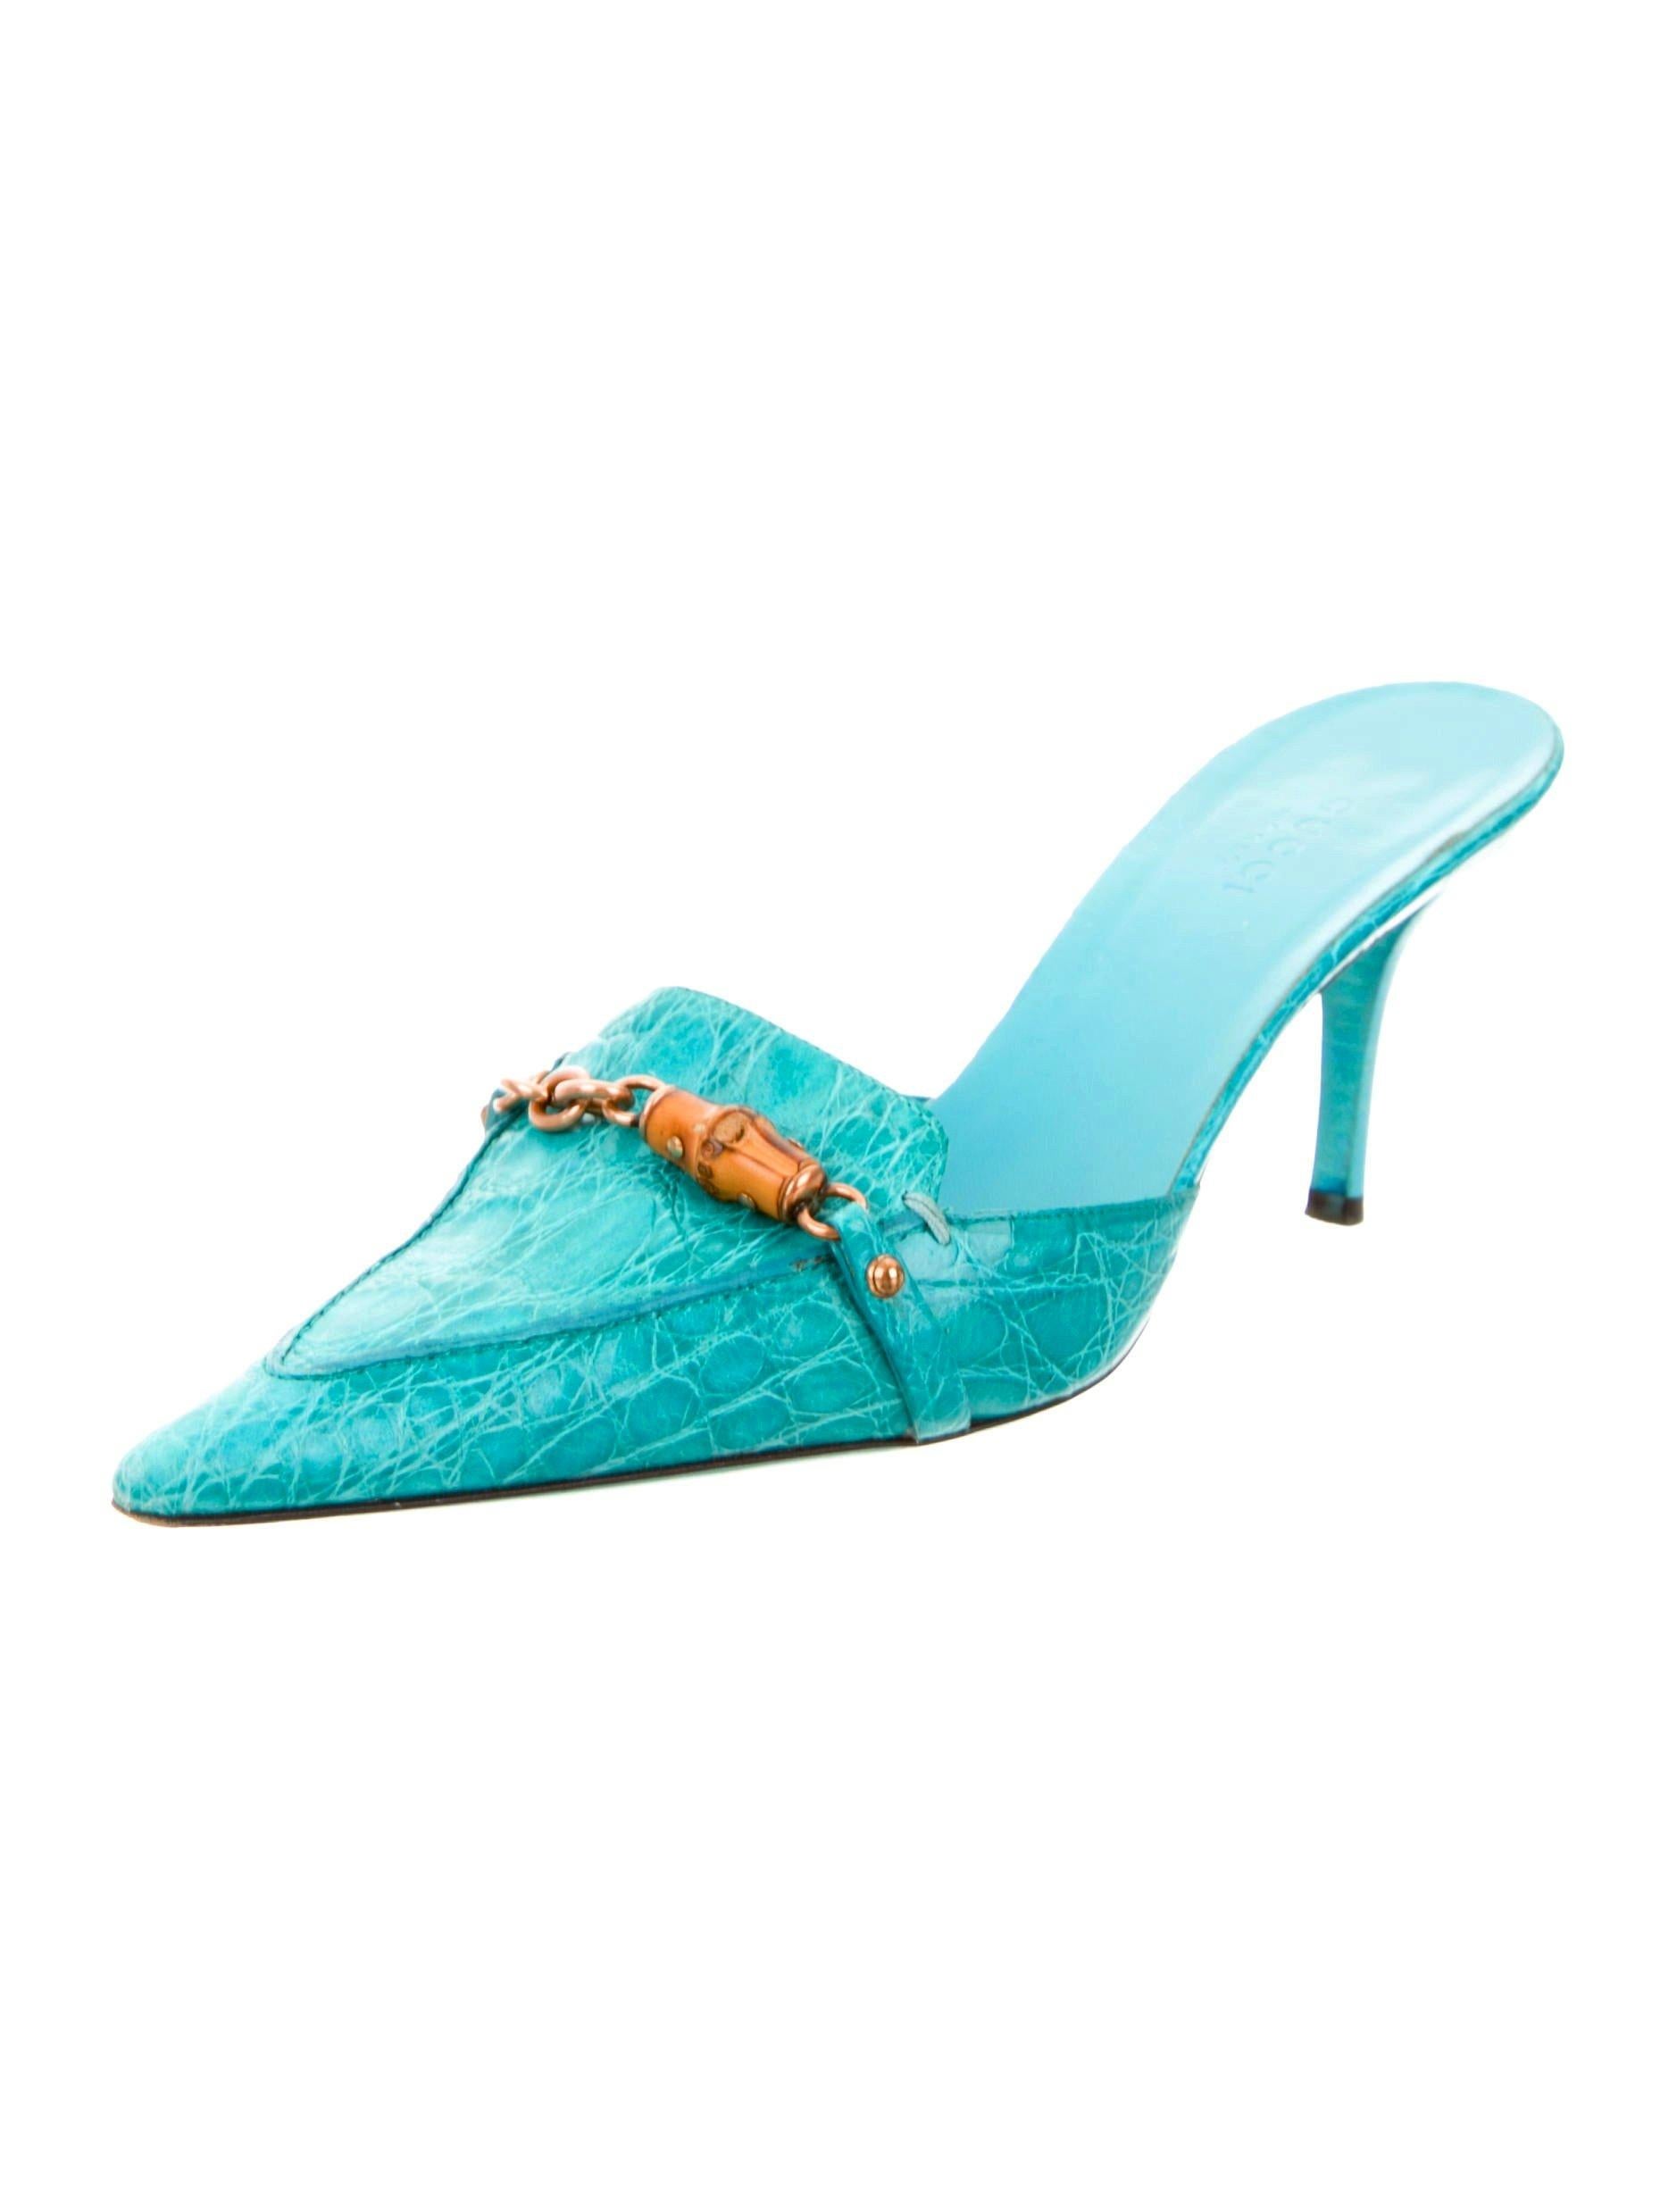 GORGEOUS GUCCI TURQUOISE MULES

MADE OUT OF REAL CROCODILE SKIN - NO PRINT!

DETAILS:

A GUCCI signature piece that will last you for years
Perfect for the coming summer
Beautiful turquoise crocodile skin
Bamboo and chain detail
Size 8.5B
Made in